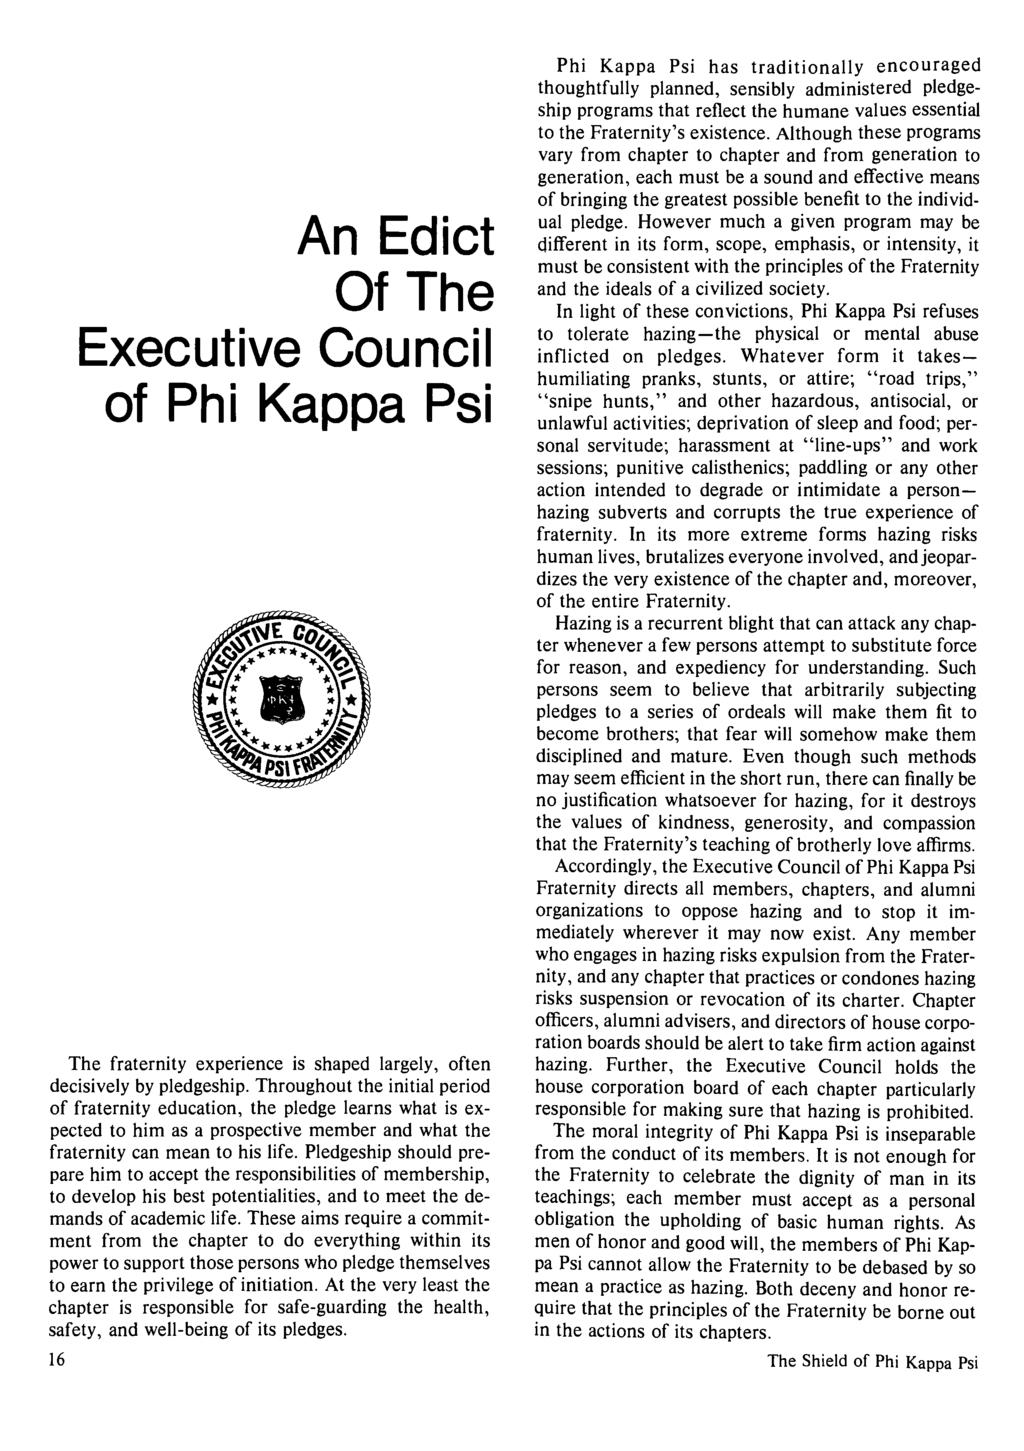 An Edict Of The Executive Council of Phi Kappa Psi The fraternity experience is shaped largely, often decisively by pledgeship.